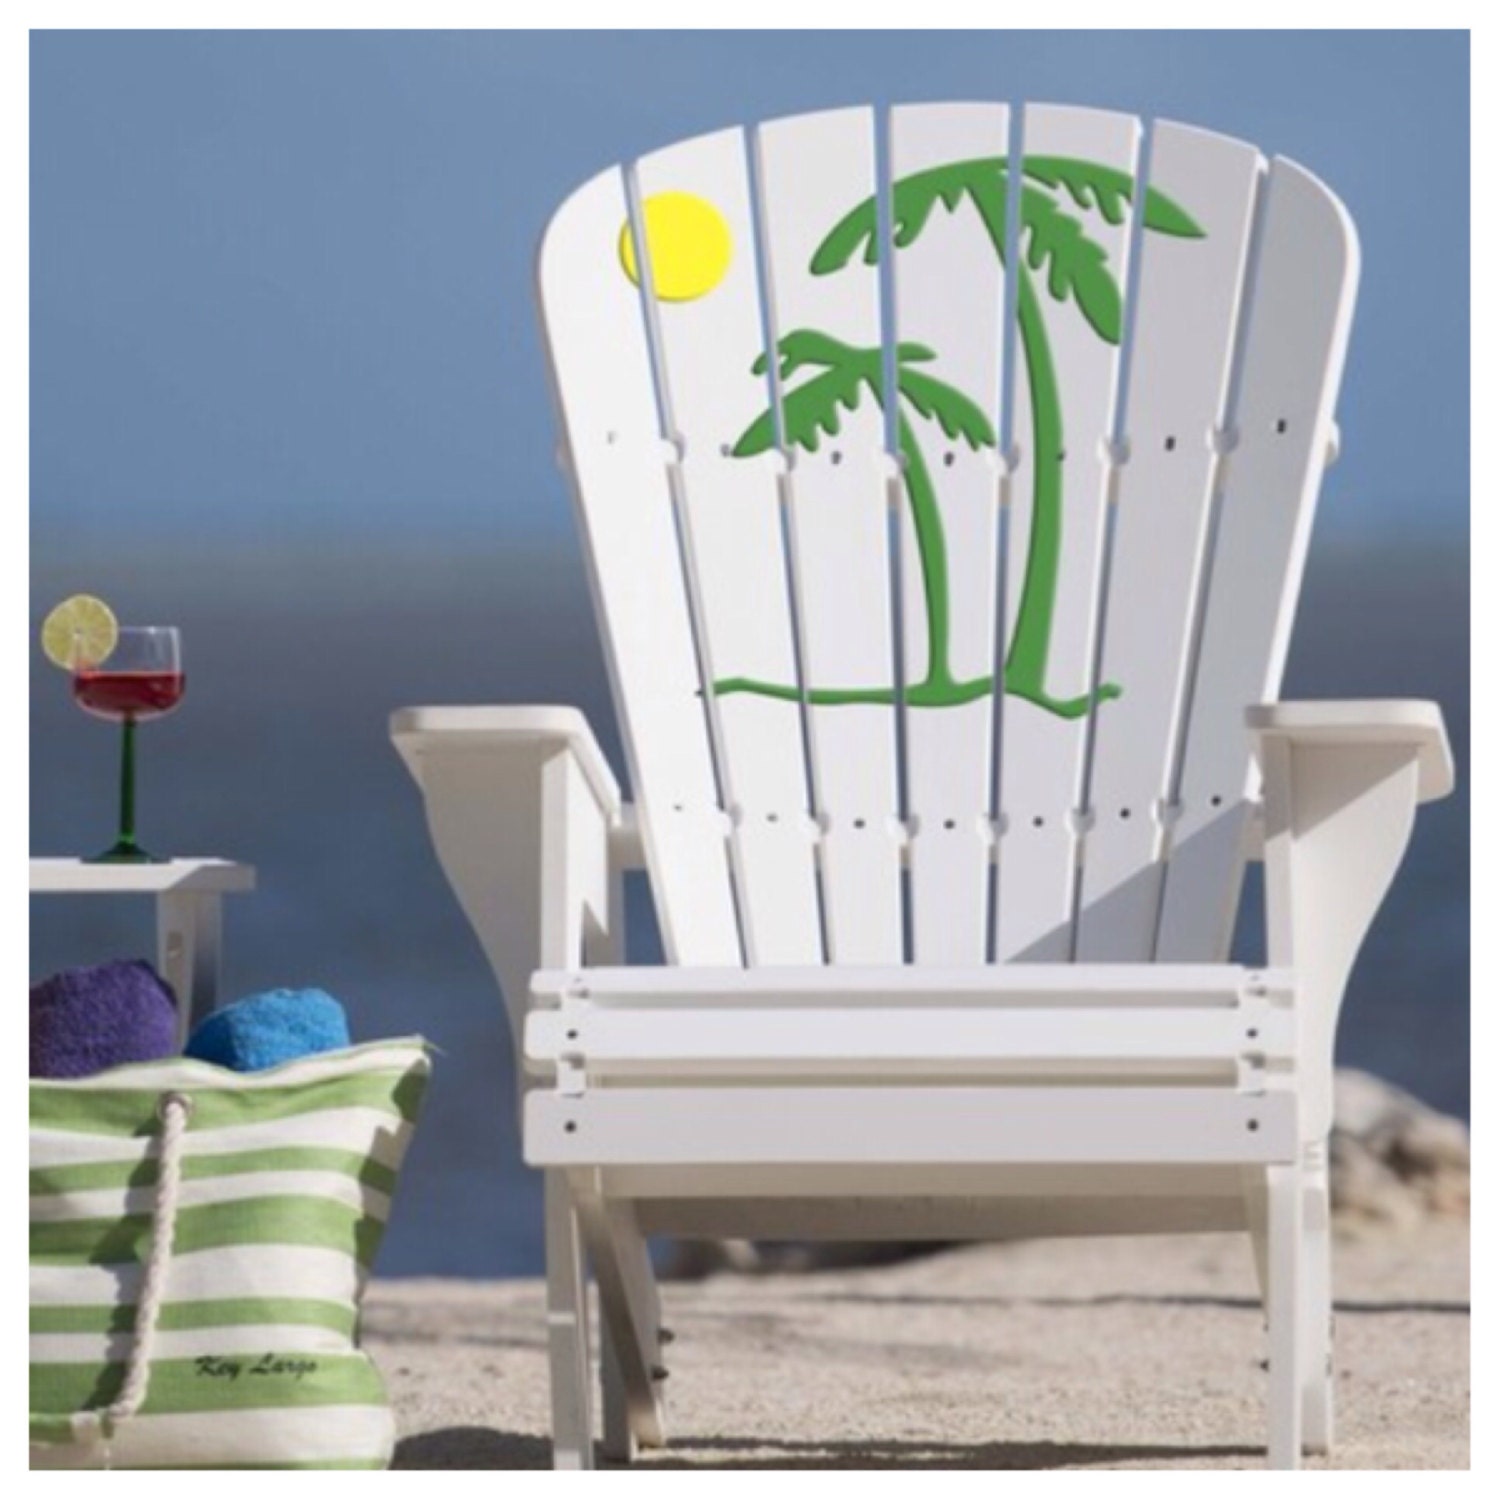 Pro Wooden Guide: Hard resin adirondack chairs Best price